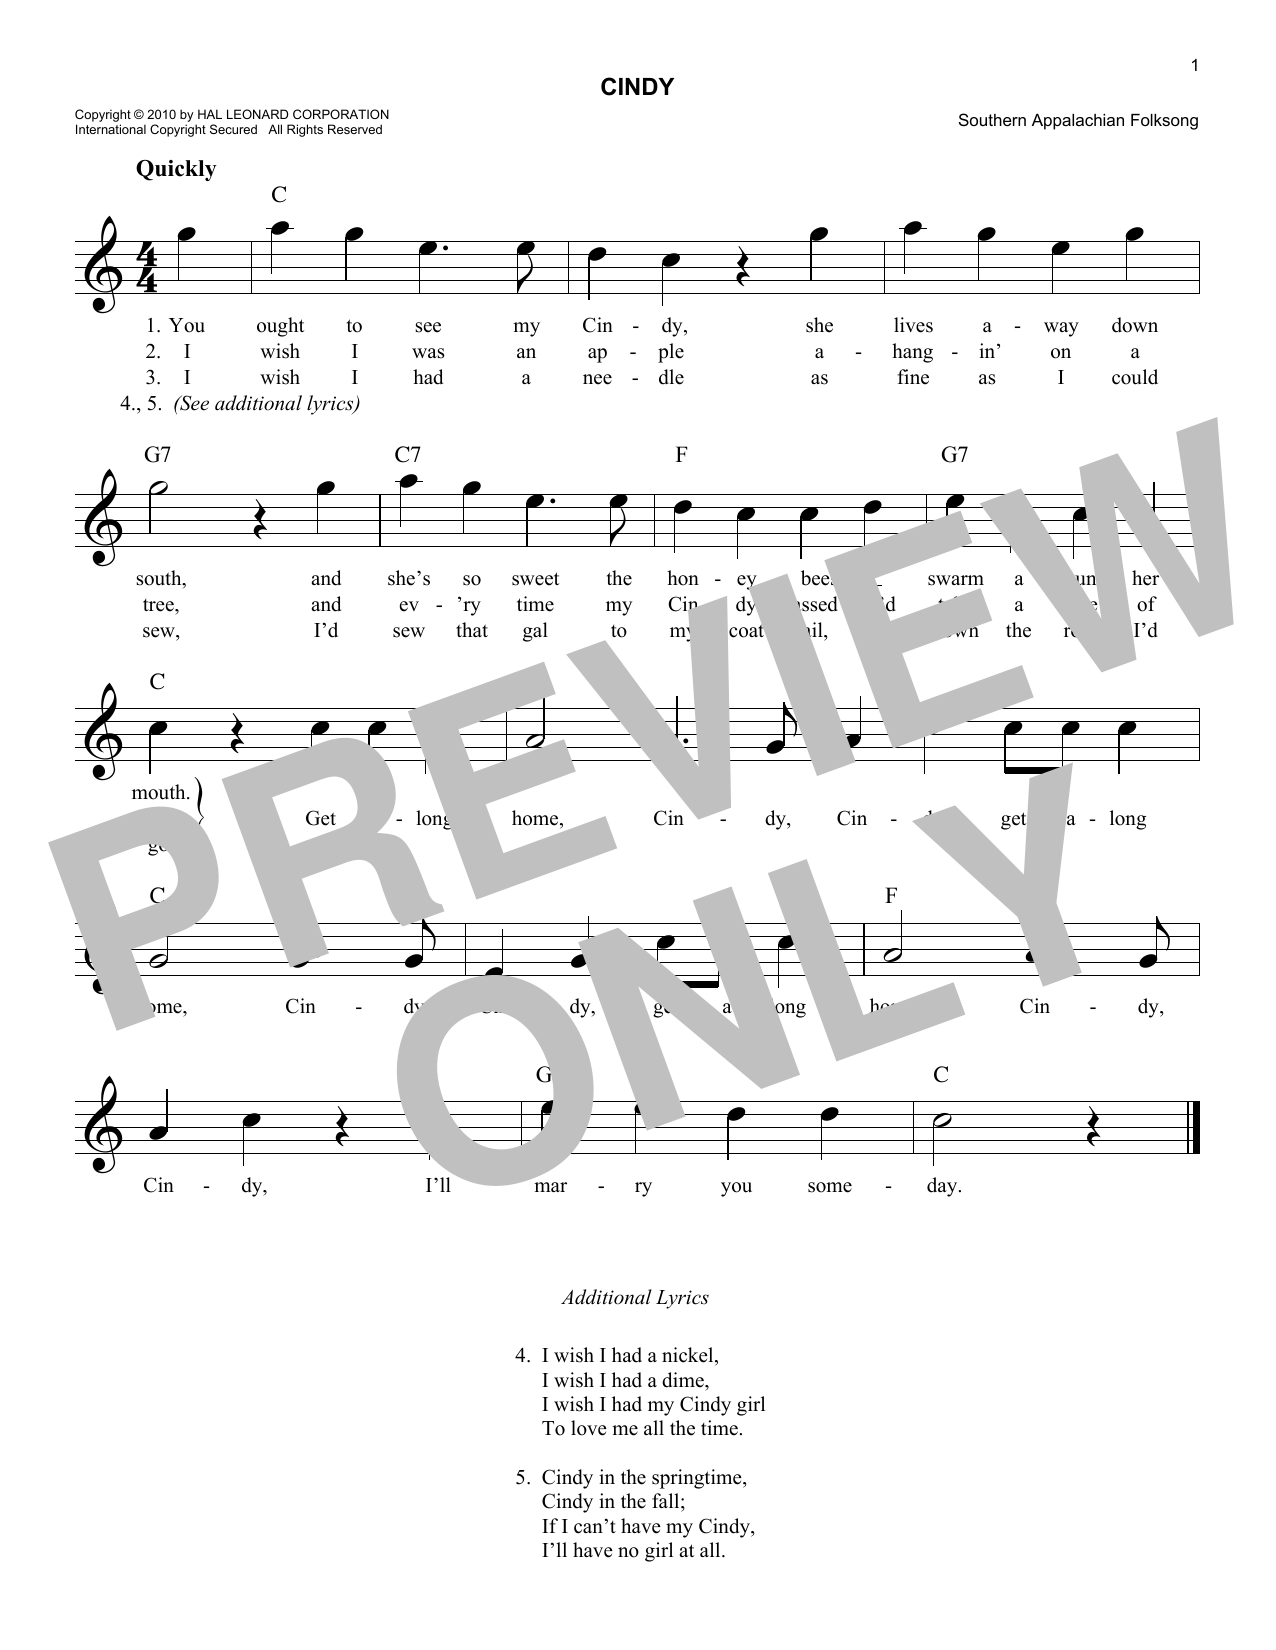 Download Traditional Folksong Cindy Sheet Music